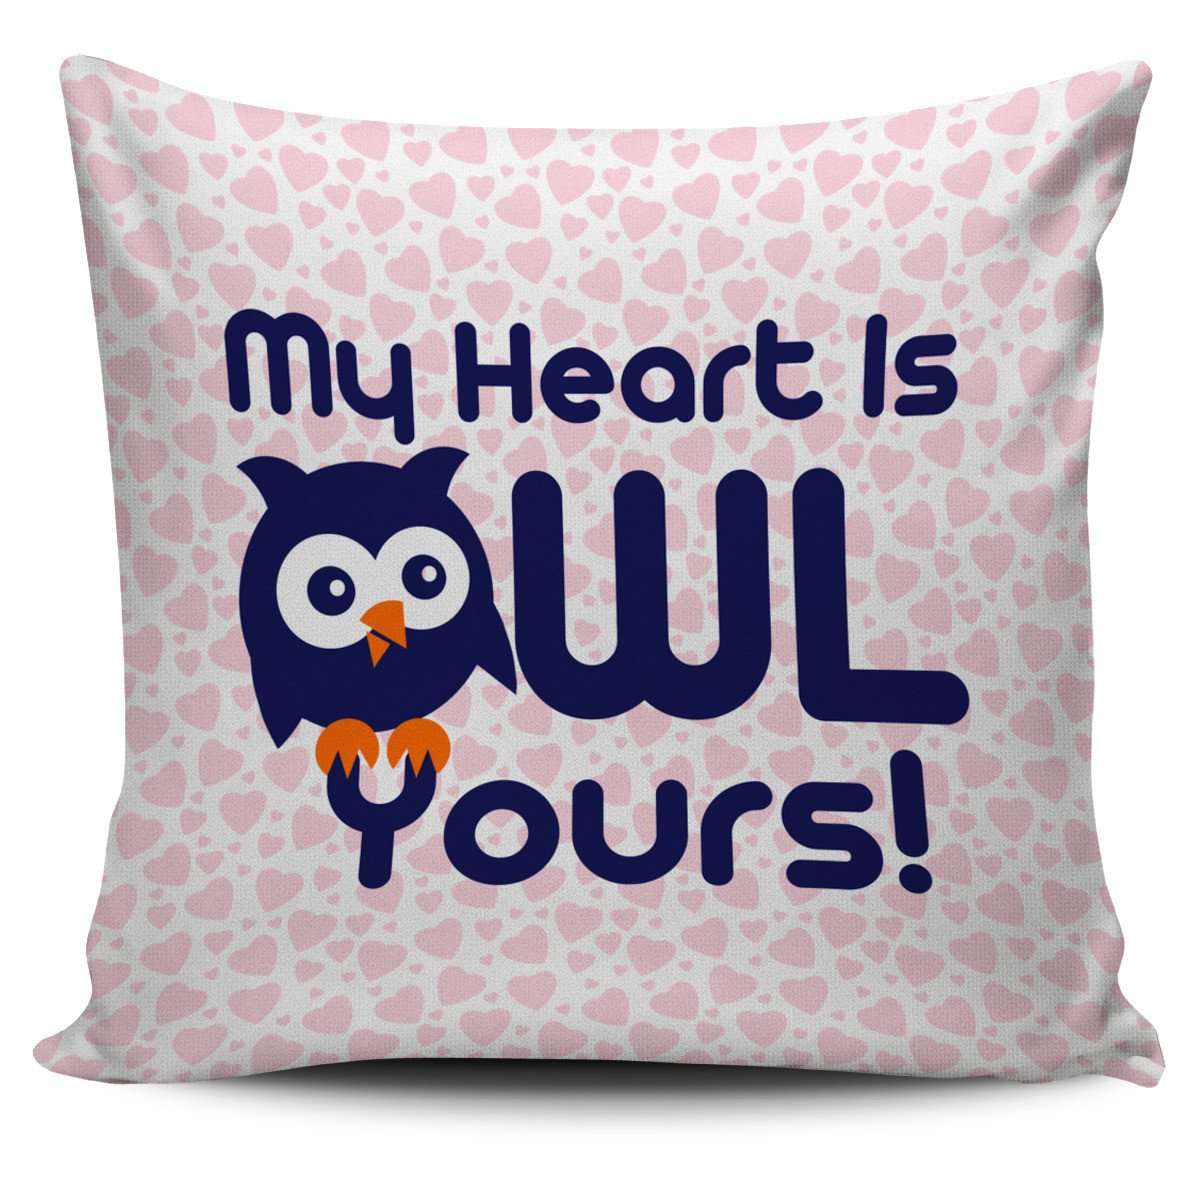 Designs by MyUtopia Shout Out:My Heart is Owl Yours! Pillowcase